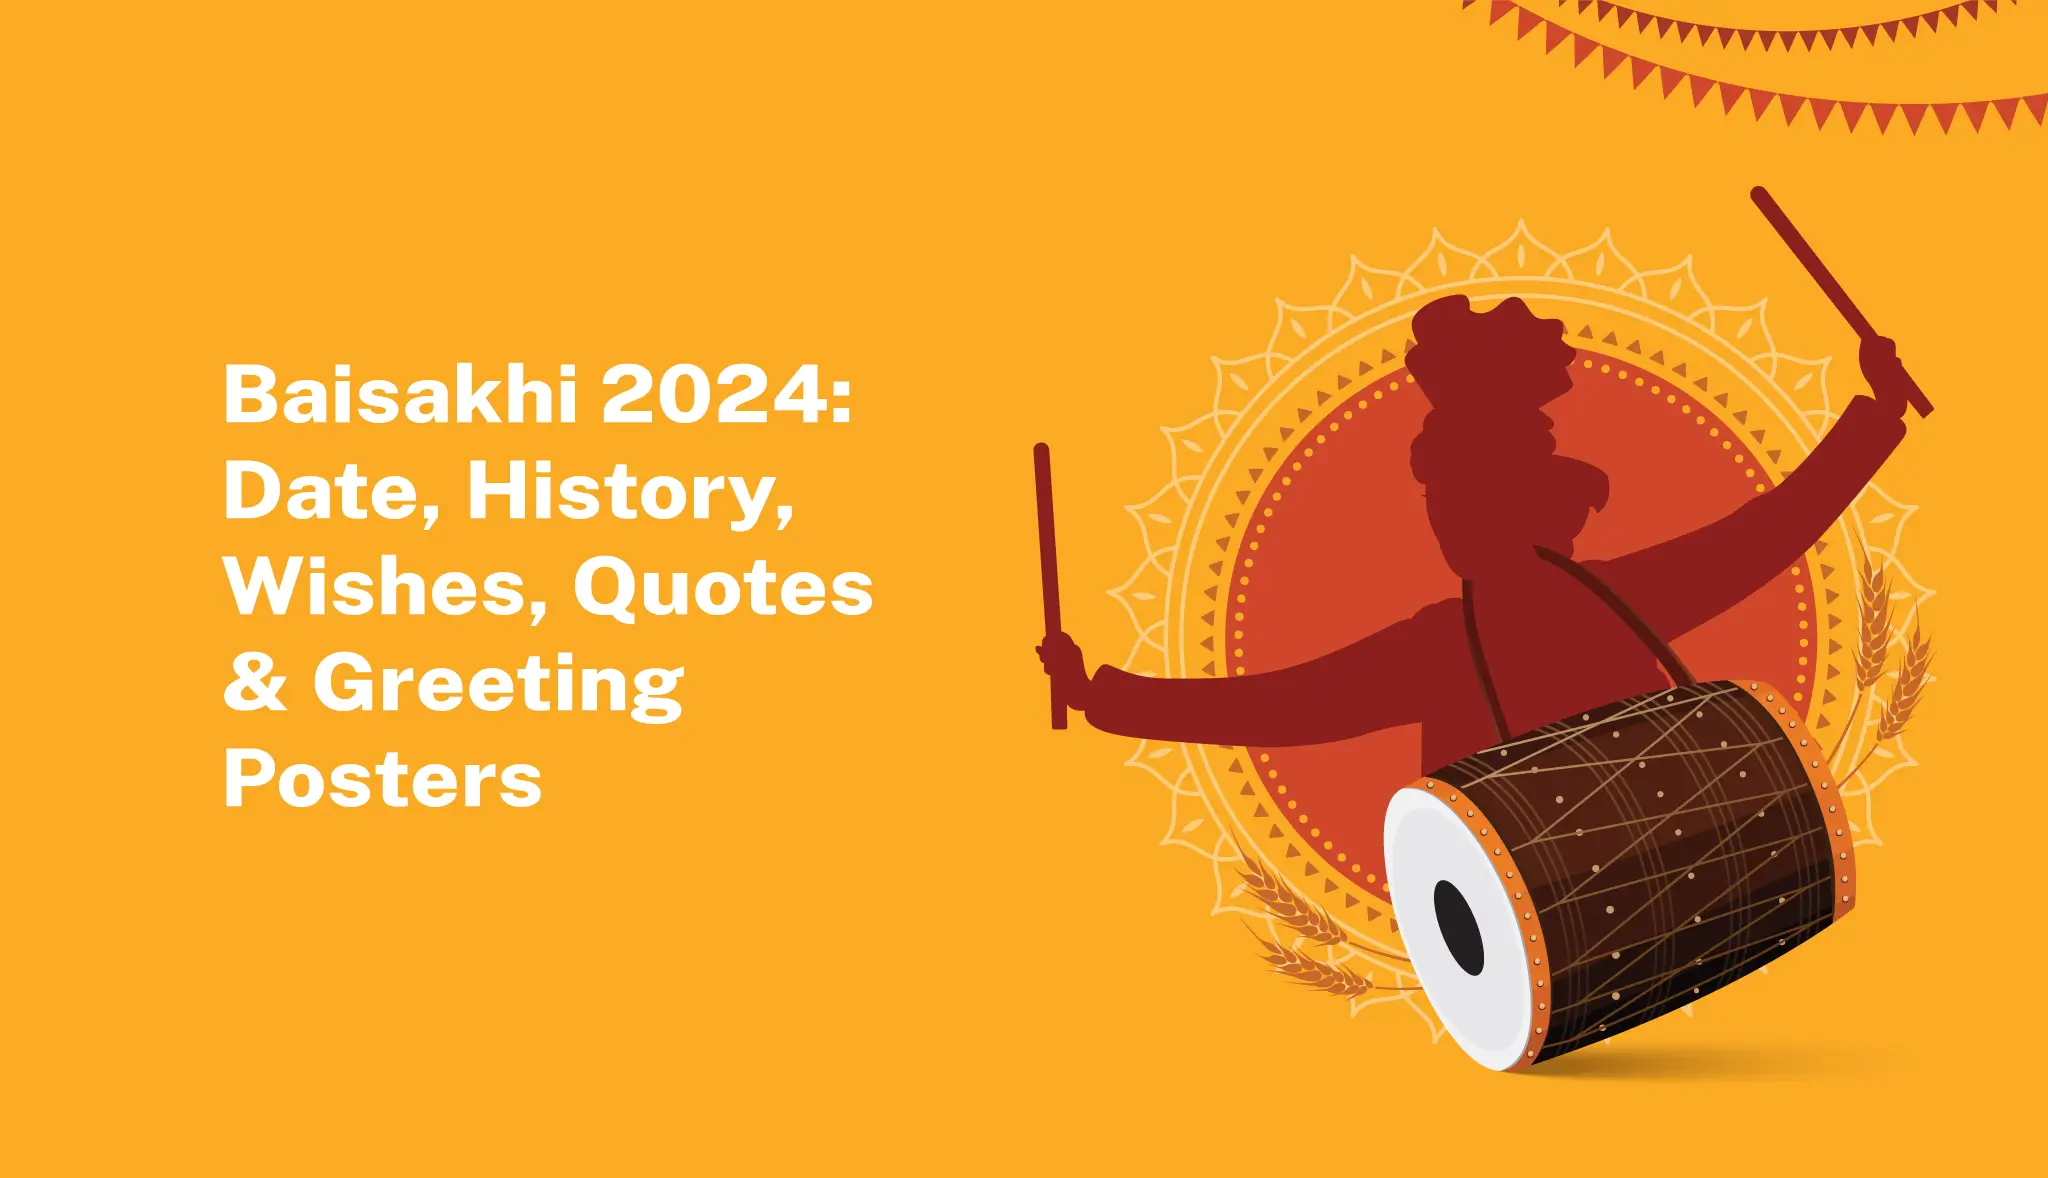 Baisakhi 2024: Date, History, Wishes, Quotes & Greeting Posters - Postive